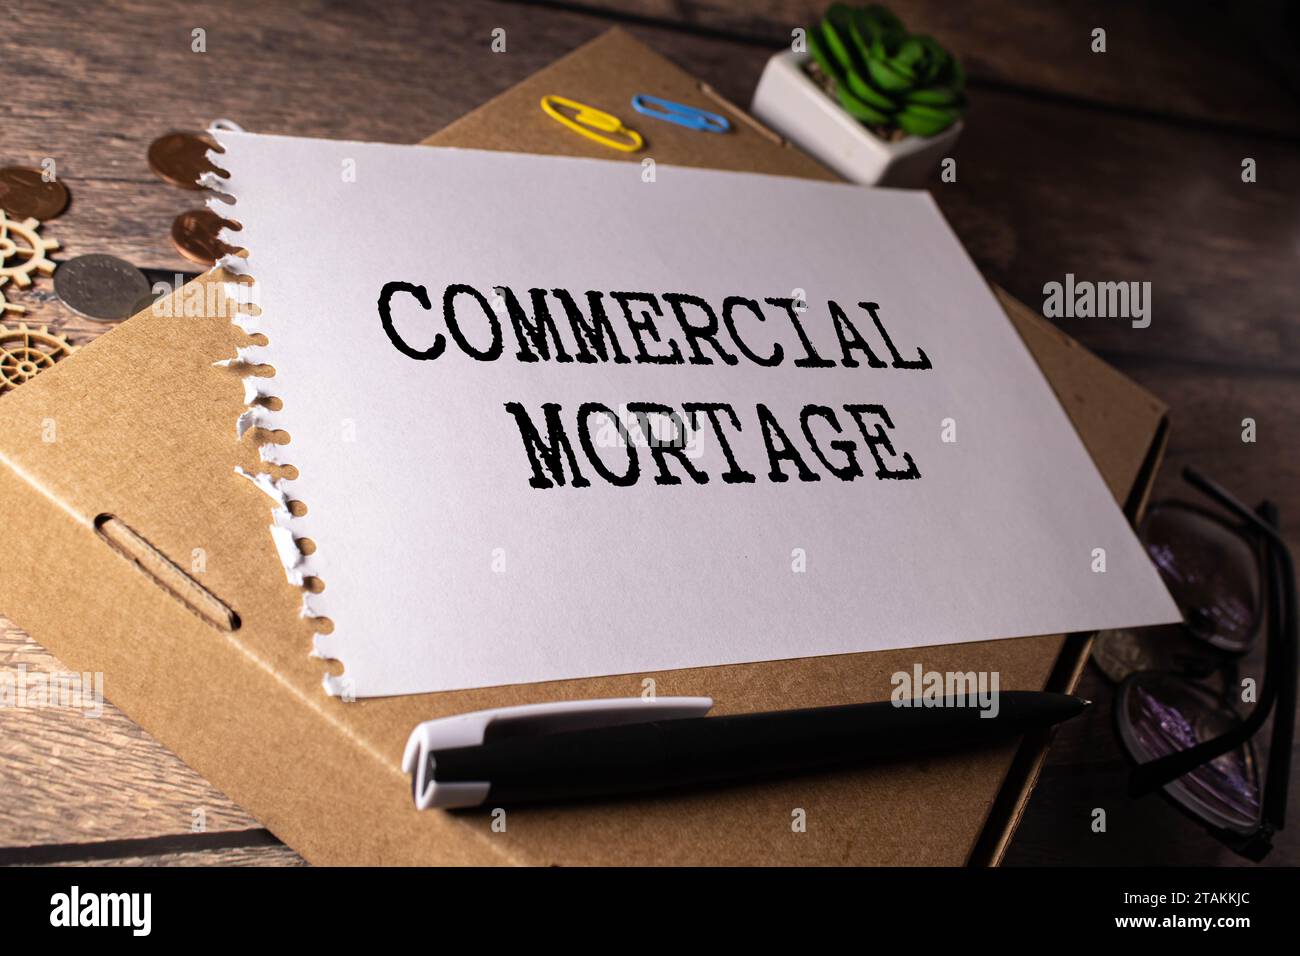 COMMERCIAL MORTGAGE, text on white notepad paper. on a white photo with torn paper. Stock Photo